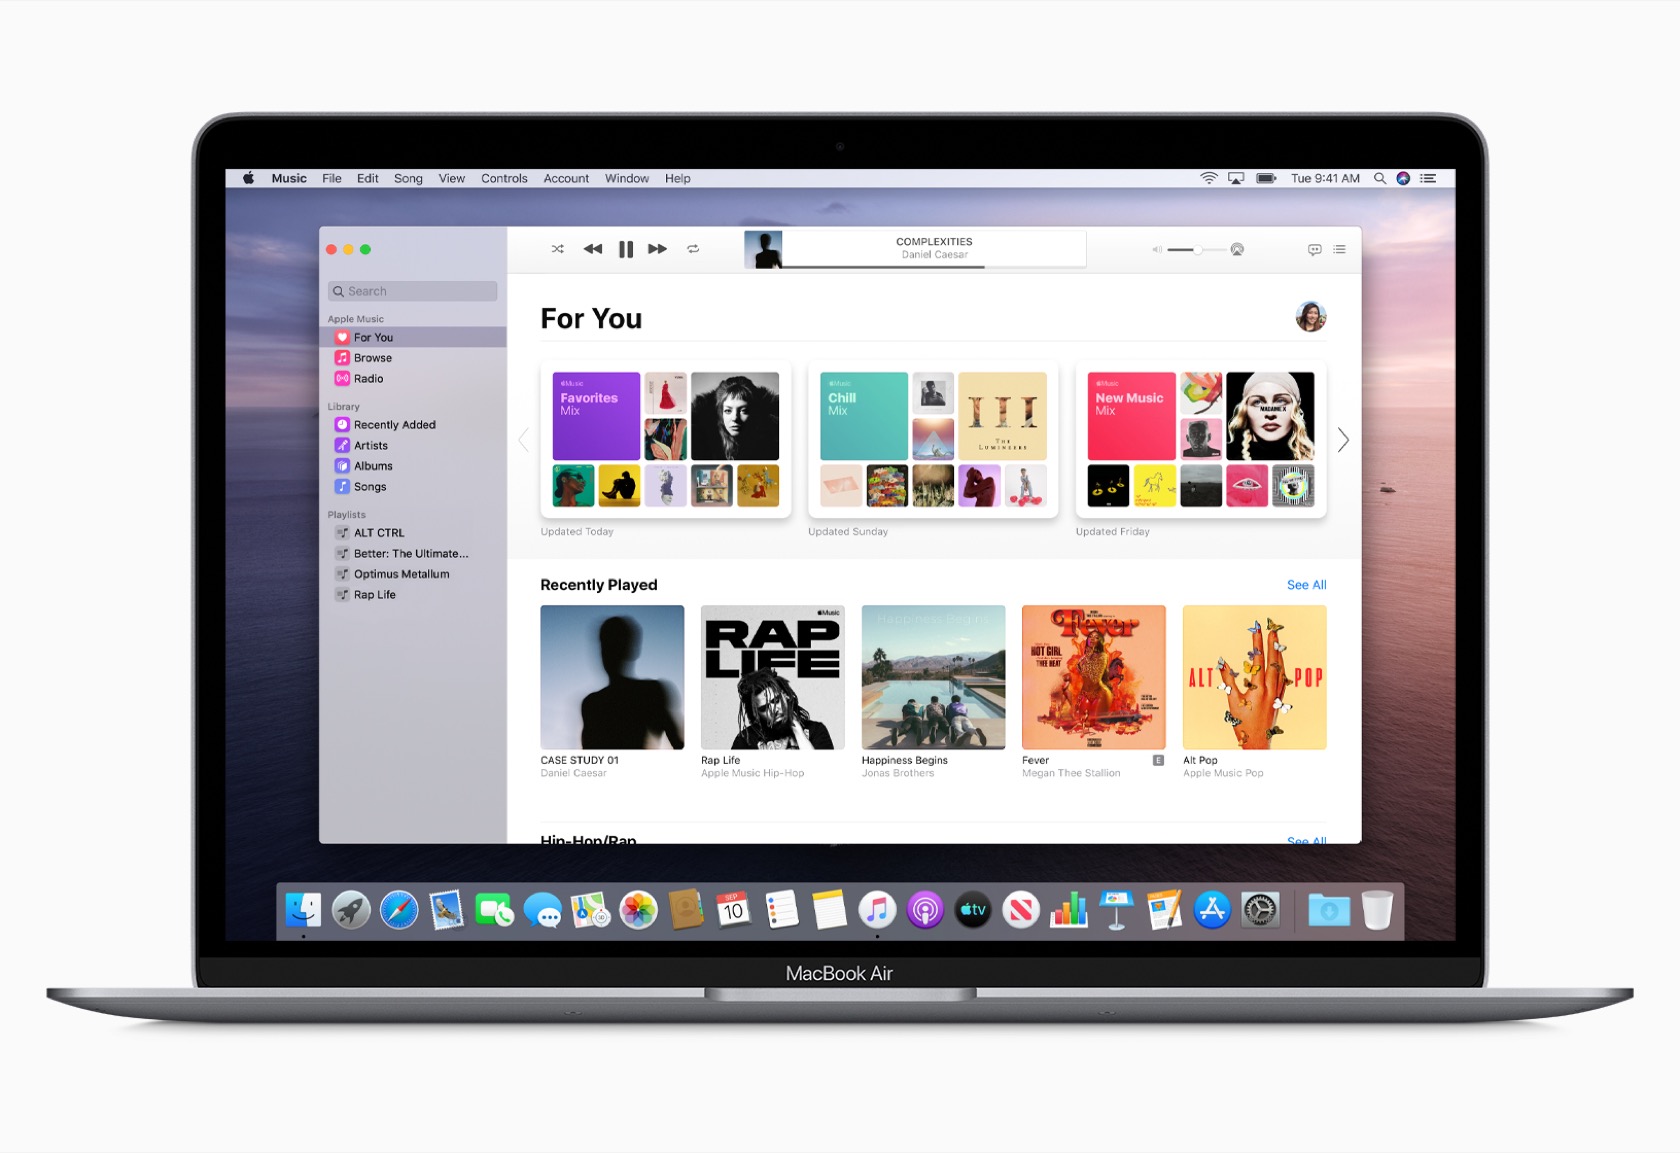 How To Update Apps On Itunes Mac